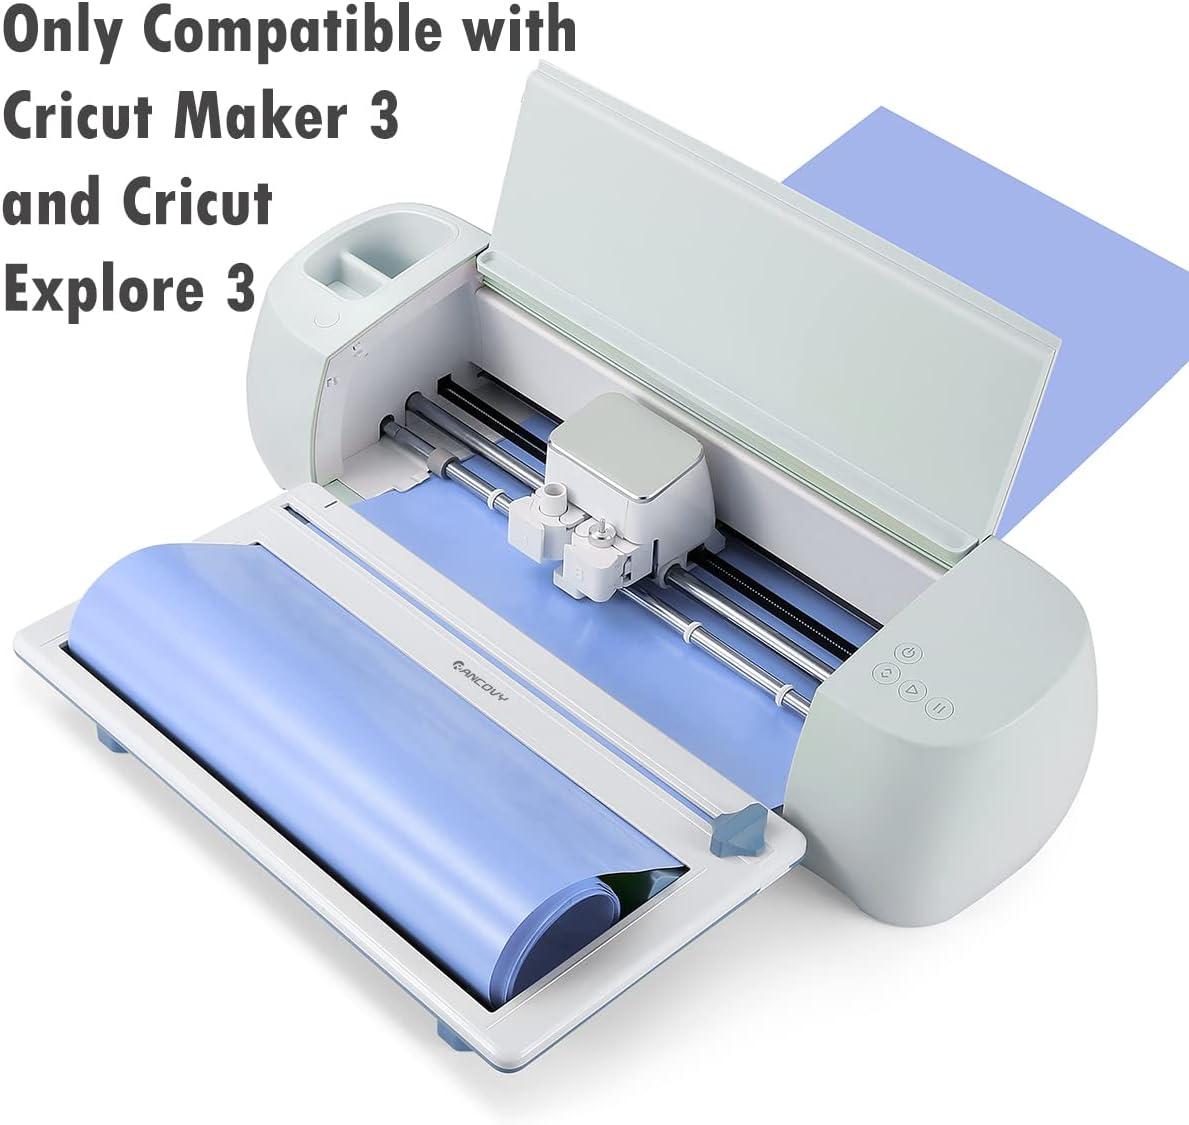 Rancovy Vinyl Roll Holder with Built in Trimmer for Cricut Maker 3 and Cricut  Explore 3